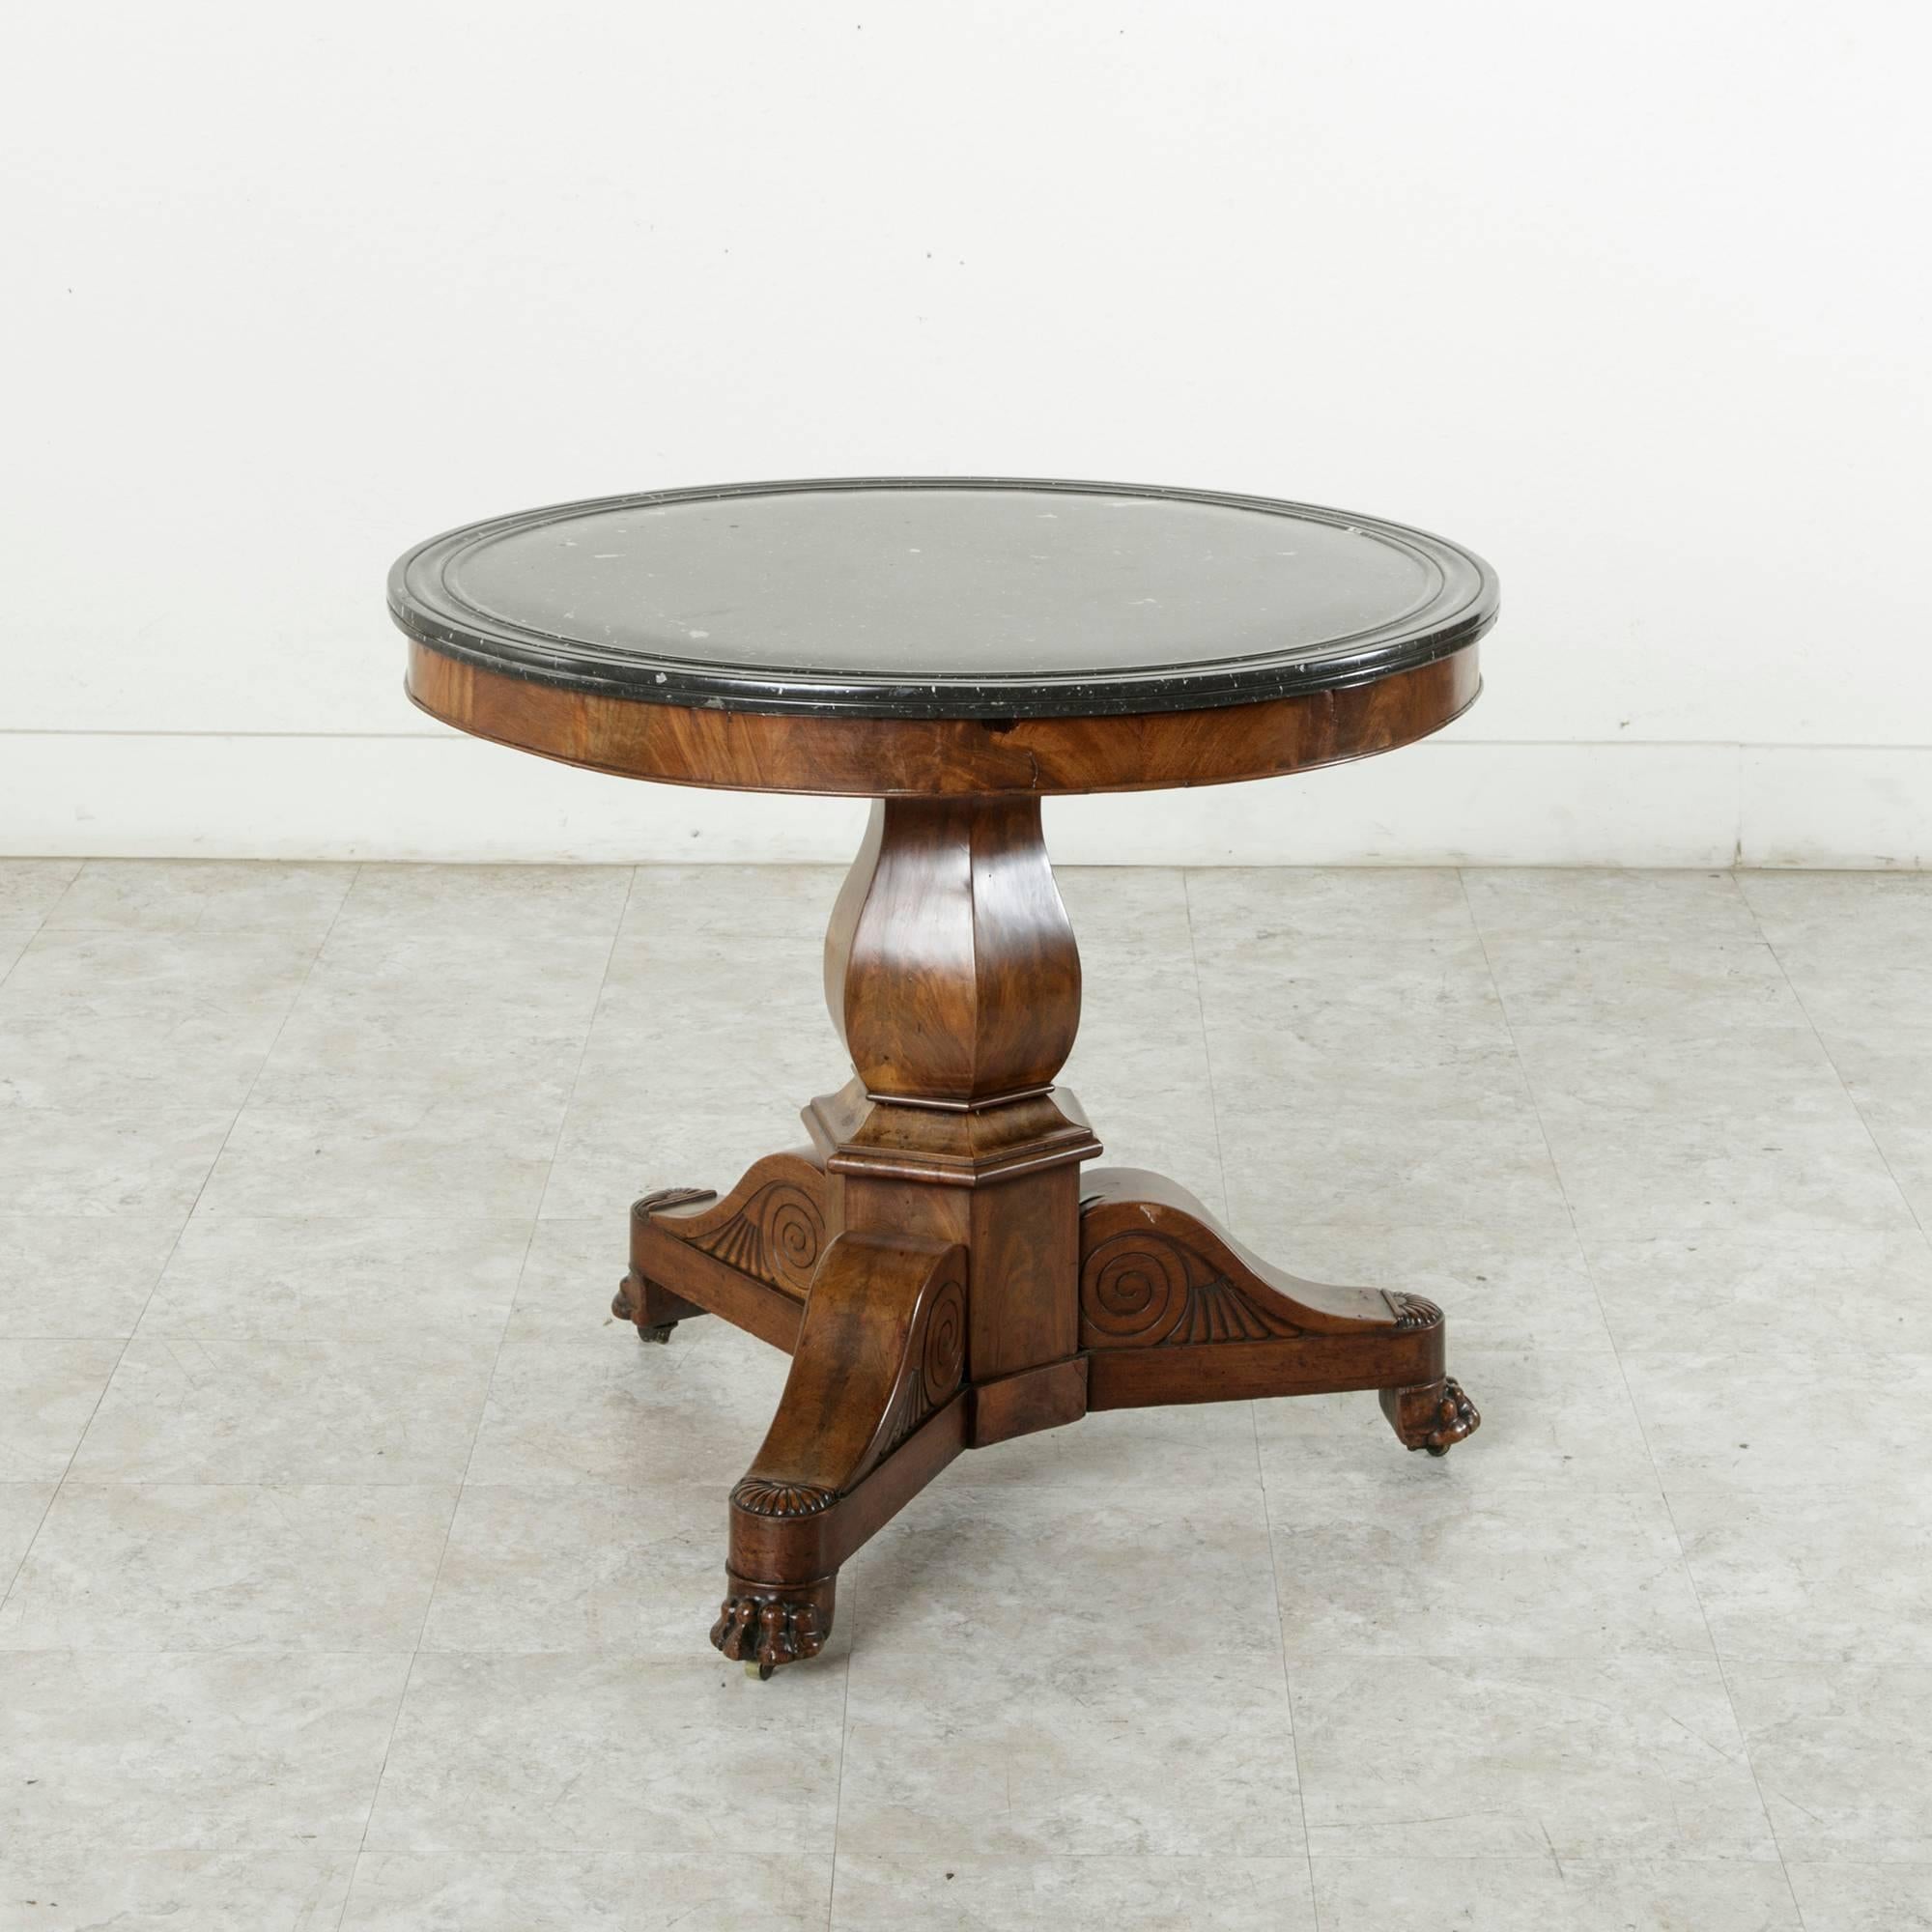 Soapstone 19th Century French Restauration Period Mahogany Gueridon or Pedestal Table